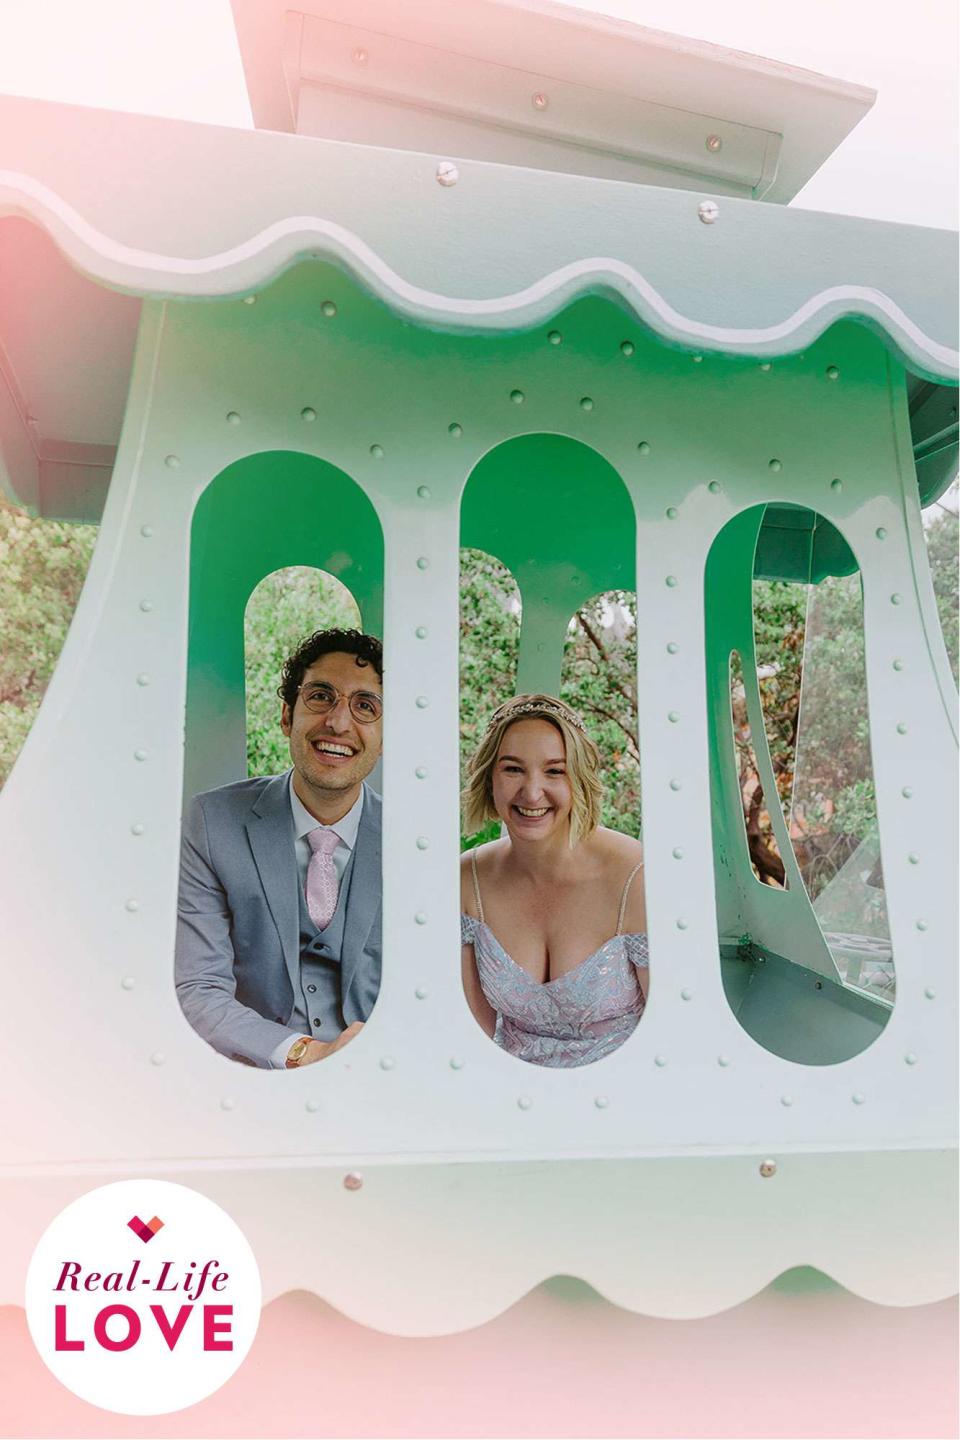 <p>Katie Weinholt Photography</p> Armin Samii and Marylee Williams aboard the Jolly Trolly during their wedding at Children